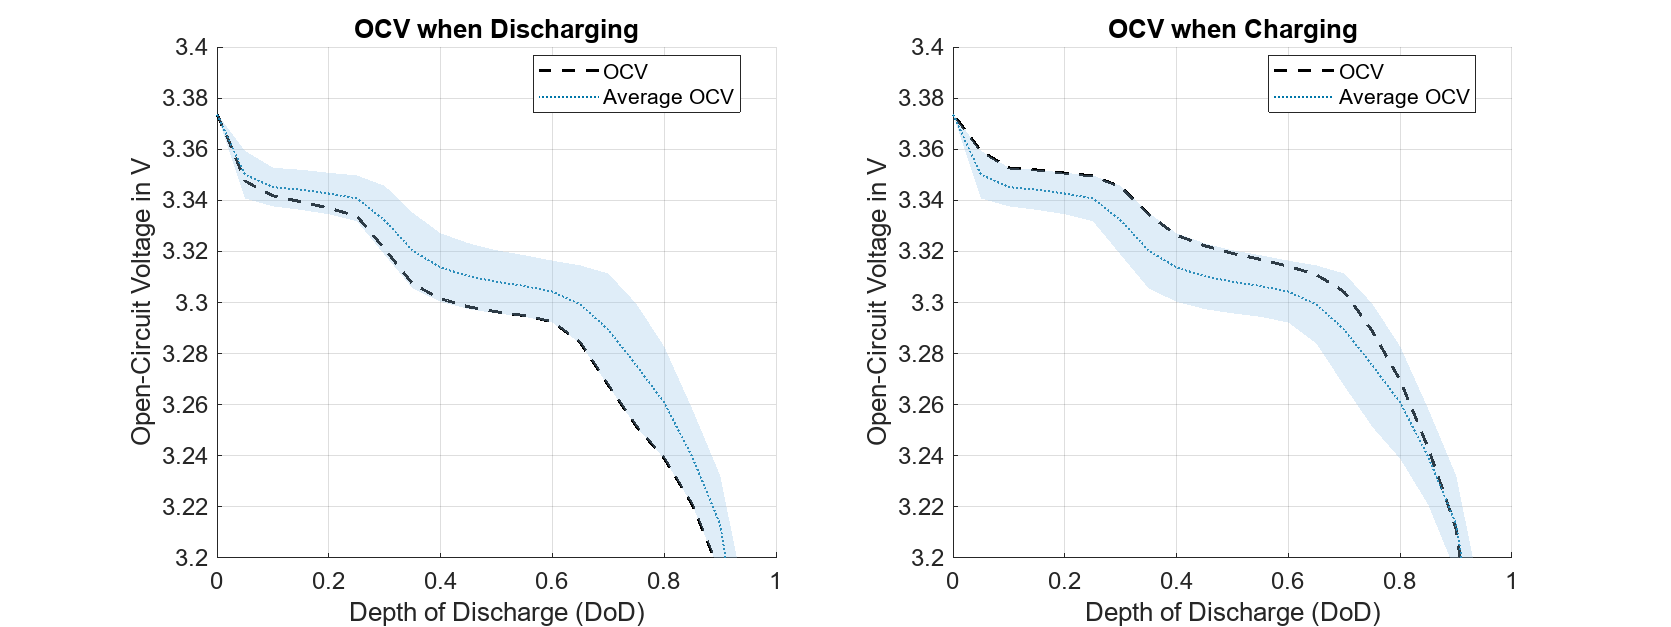 Figure cellHysteresis contains 2 axes objects. Axes object 1 with title OCV when Discharging, xlabel Depth of Discharge (DoD), ylabel Open-Circuit Voltage in V contains 3 objects of type line, patch. These objects represent OCV, Average OCV. Axes object 2 with title OCV when Charging, xlabel Depth of Discharge (DoD), ylabel Open-Circuit Voltage in V contains 3 objects of type line, patch. These objects represent OCV, Average OCV.